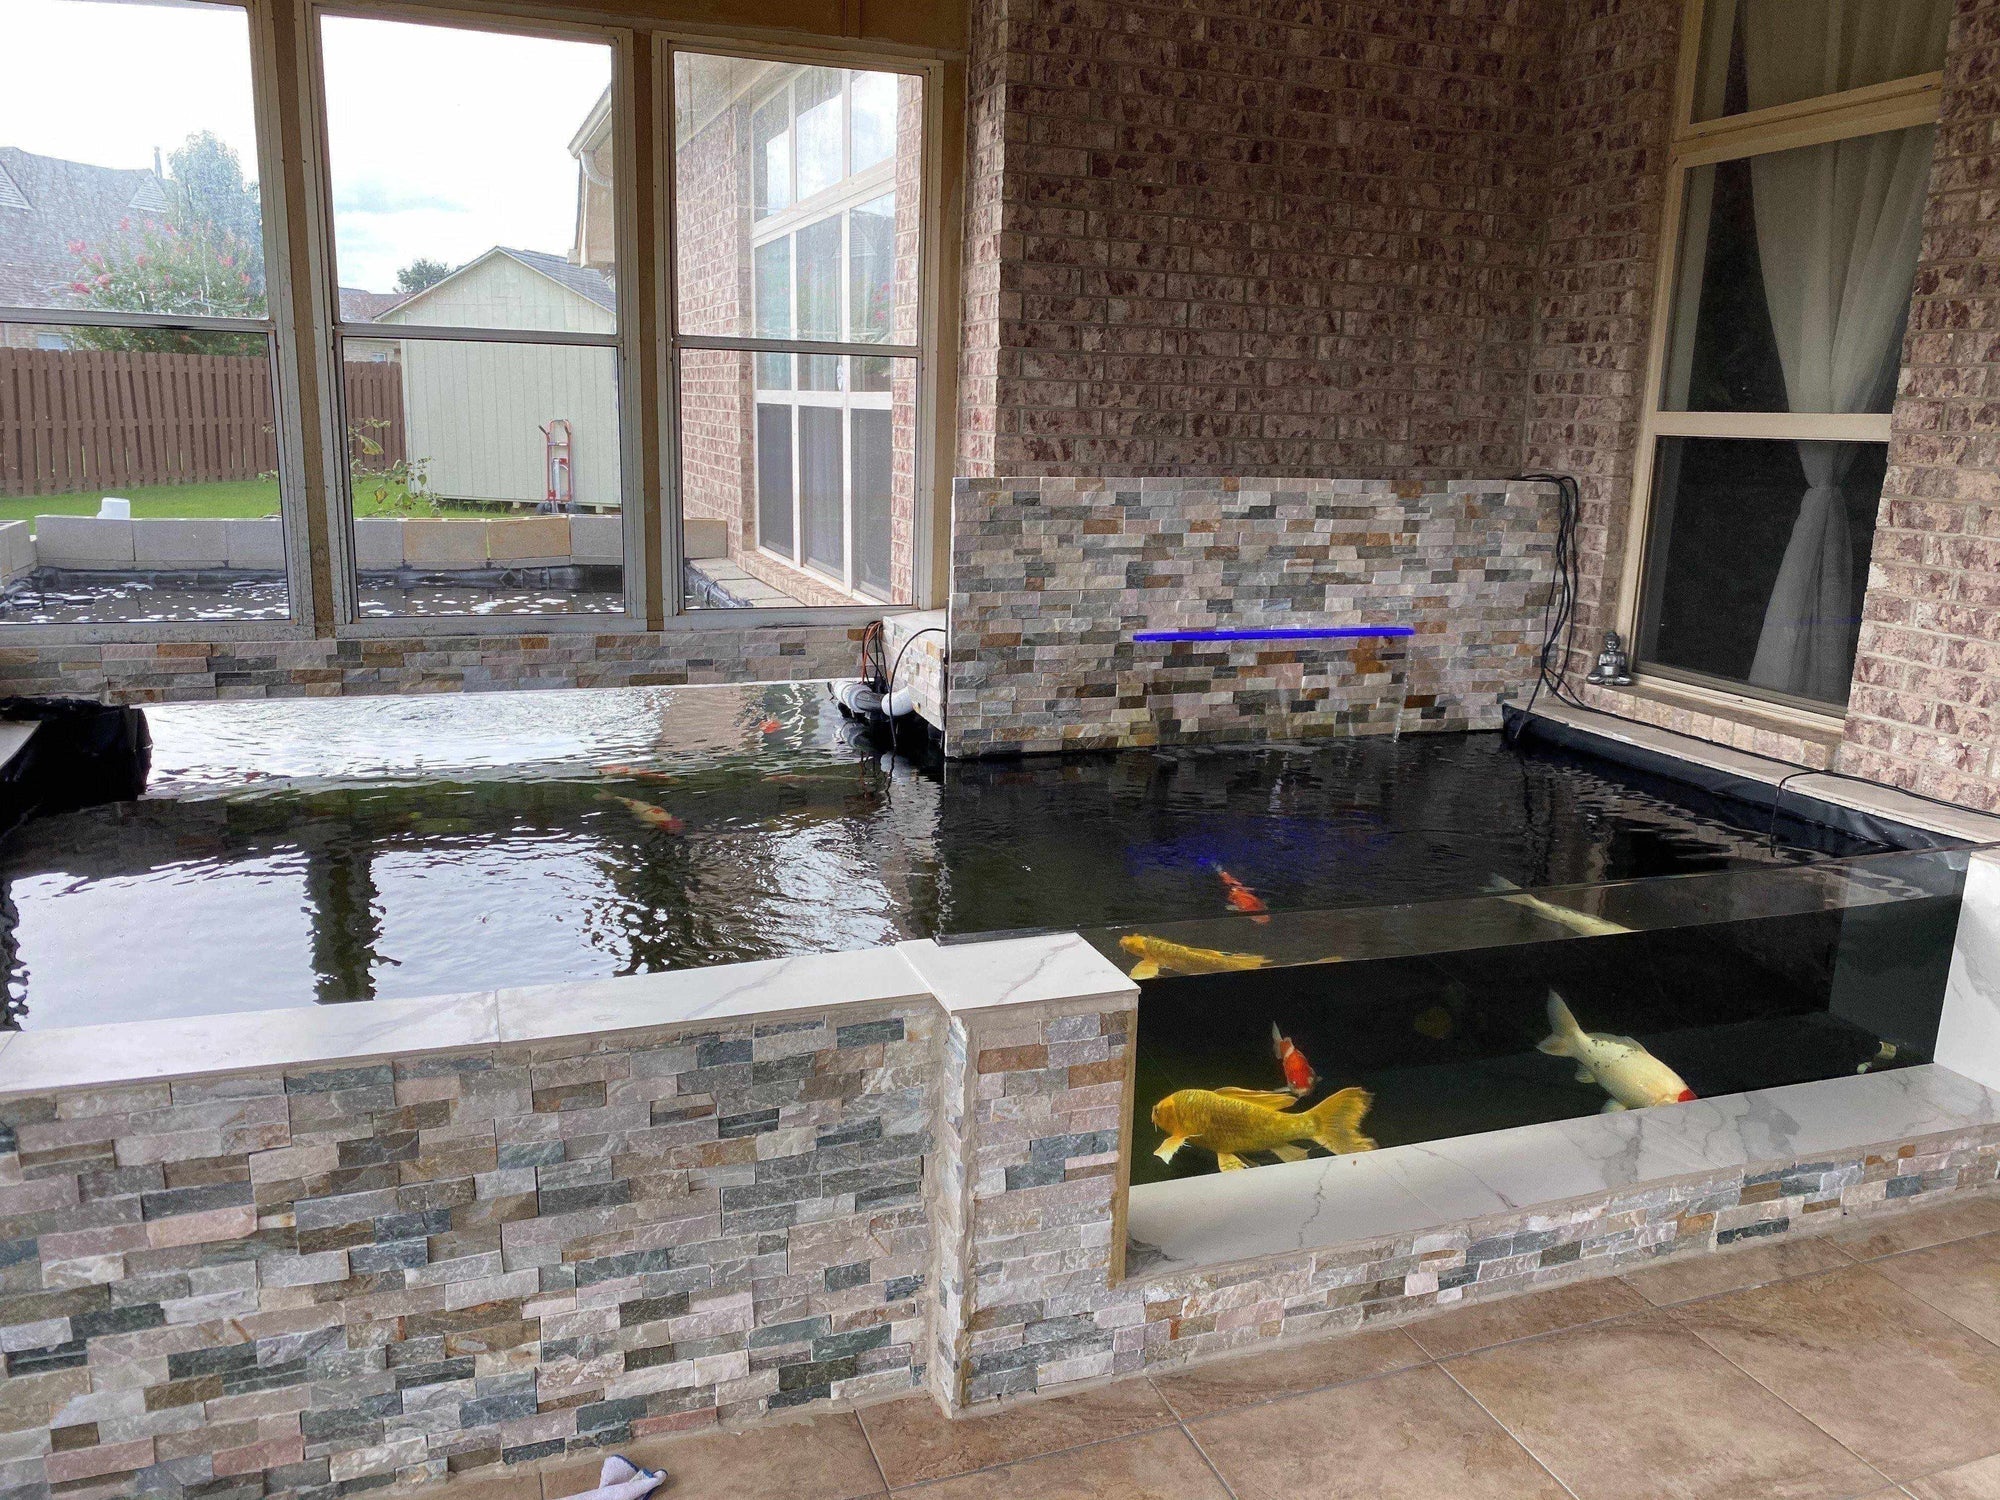 Indoor/Outdoor Koi Pond - One of a Kind - By Phuoc Tran - Play It Koi